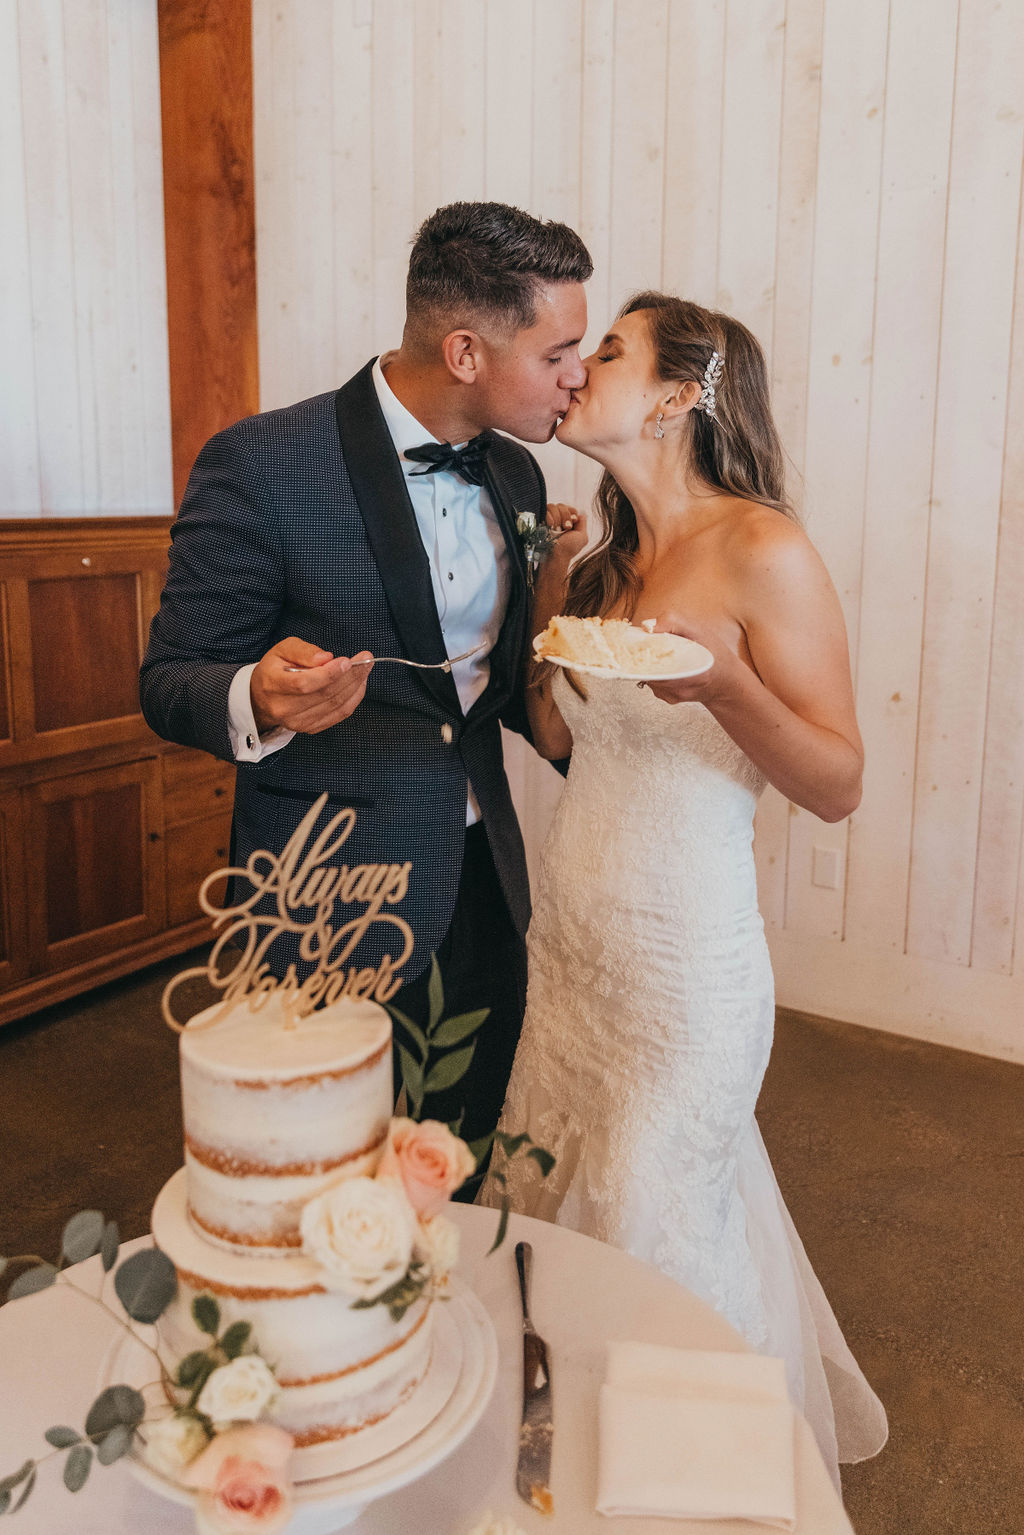 A newlywed couple kisses while holding a cake slice, standing beside a wedding cake with a topper reading "always together".